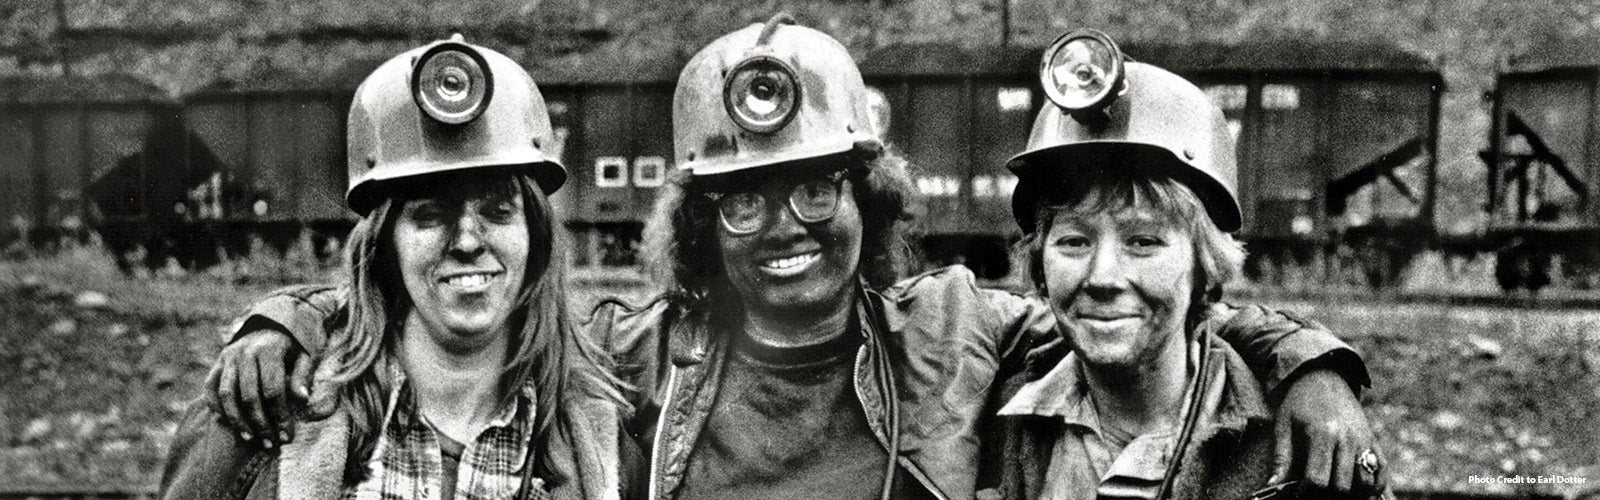 From Exhibit: In Our Blood, Coal Miners In The 1970s